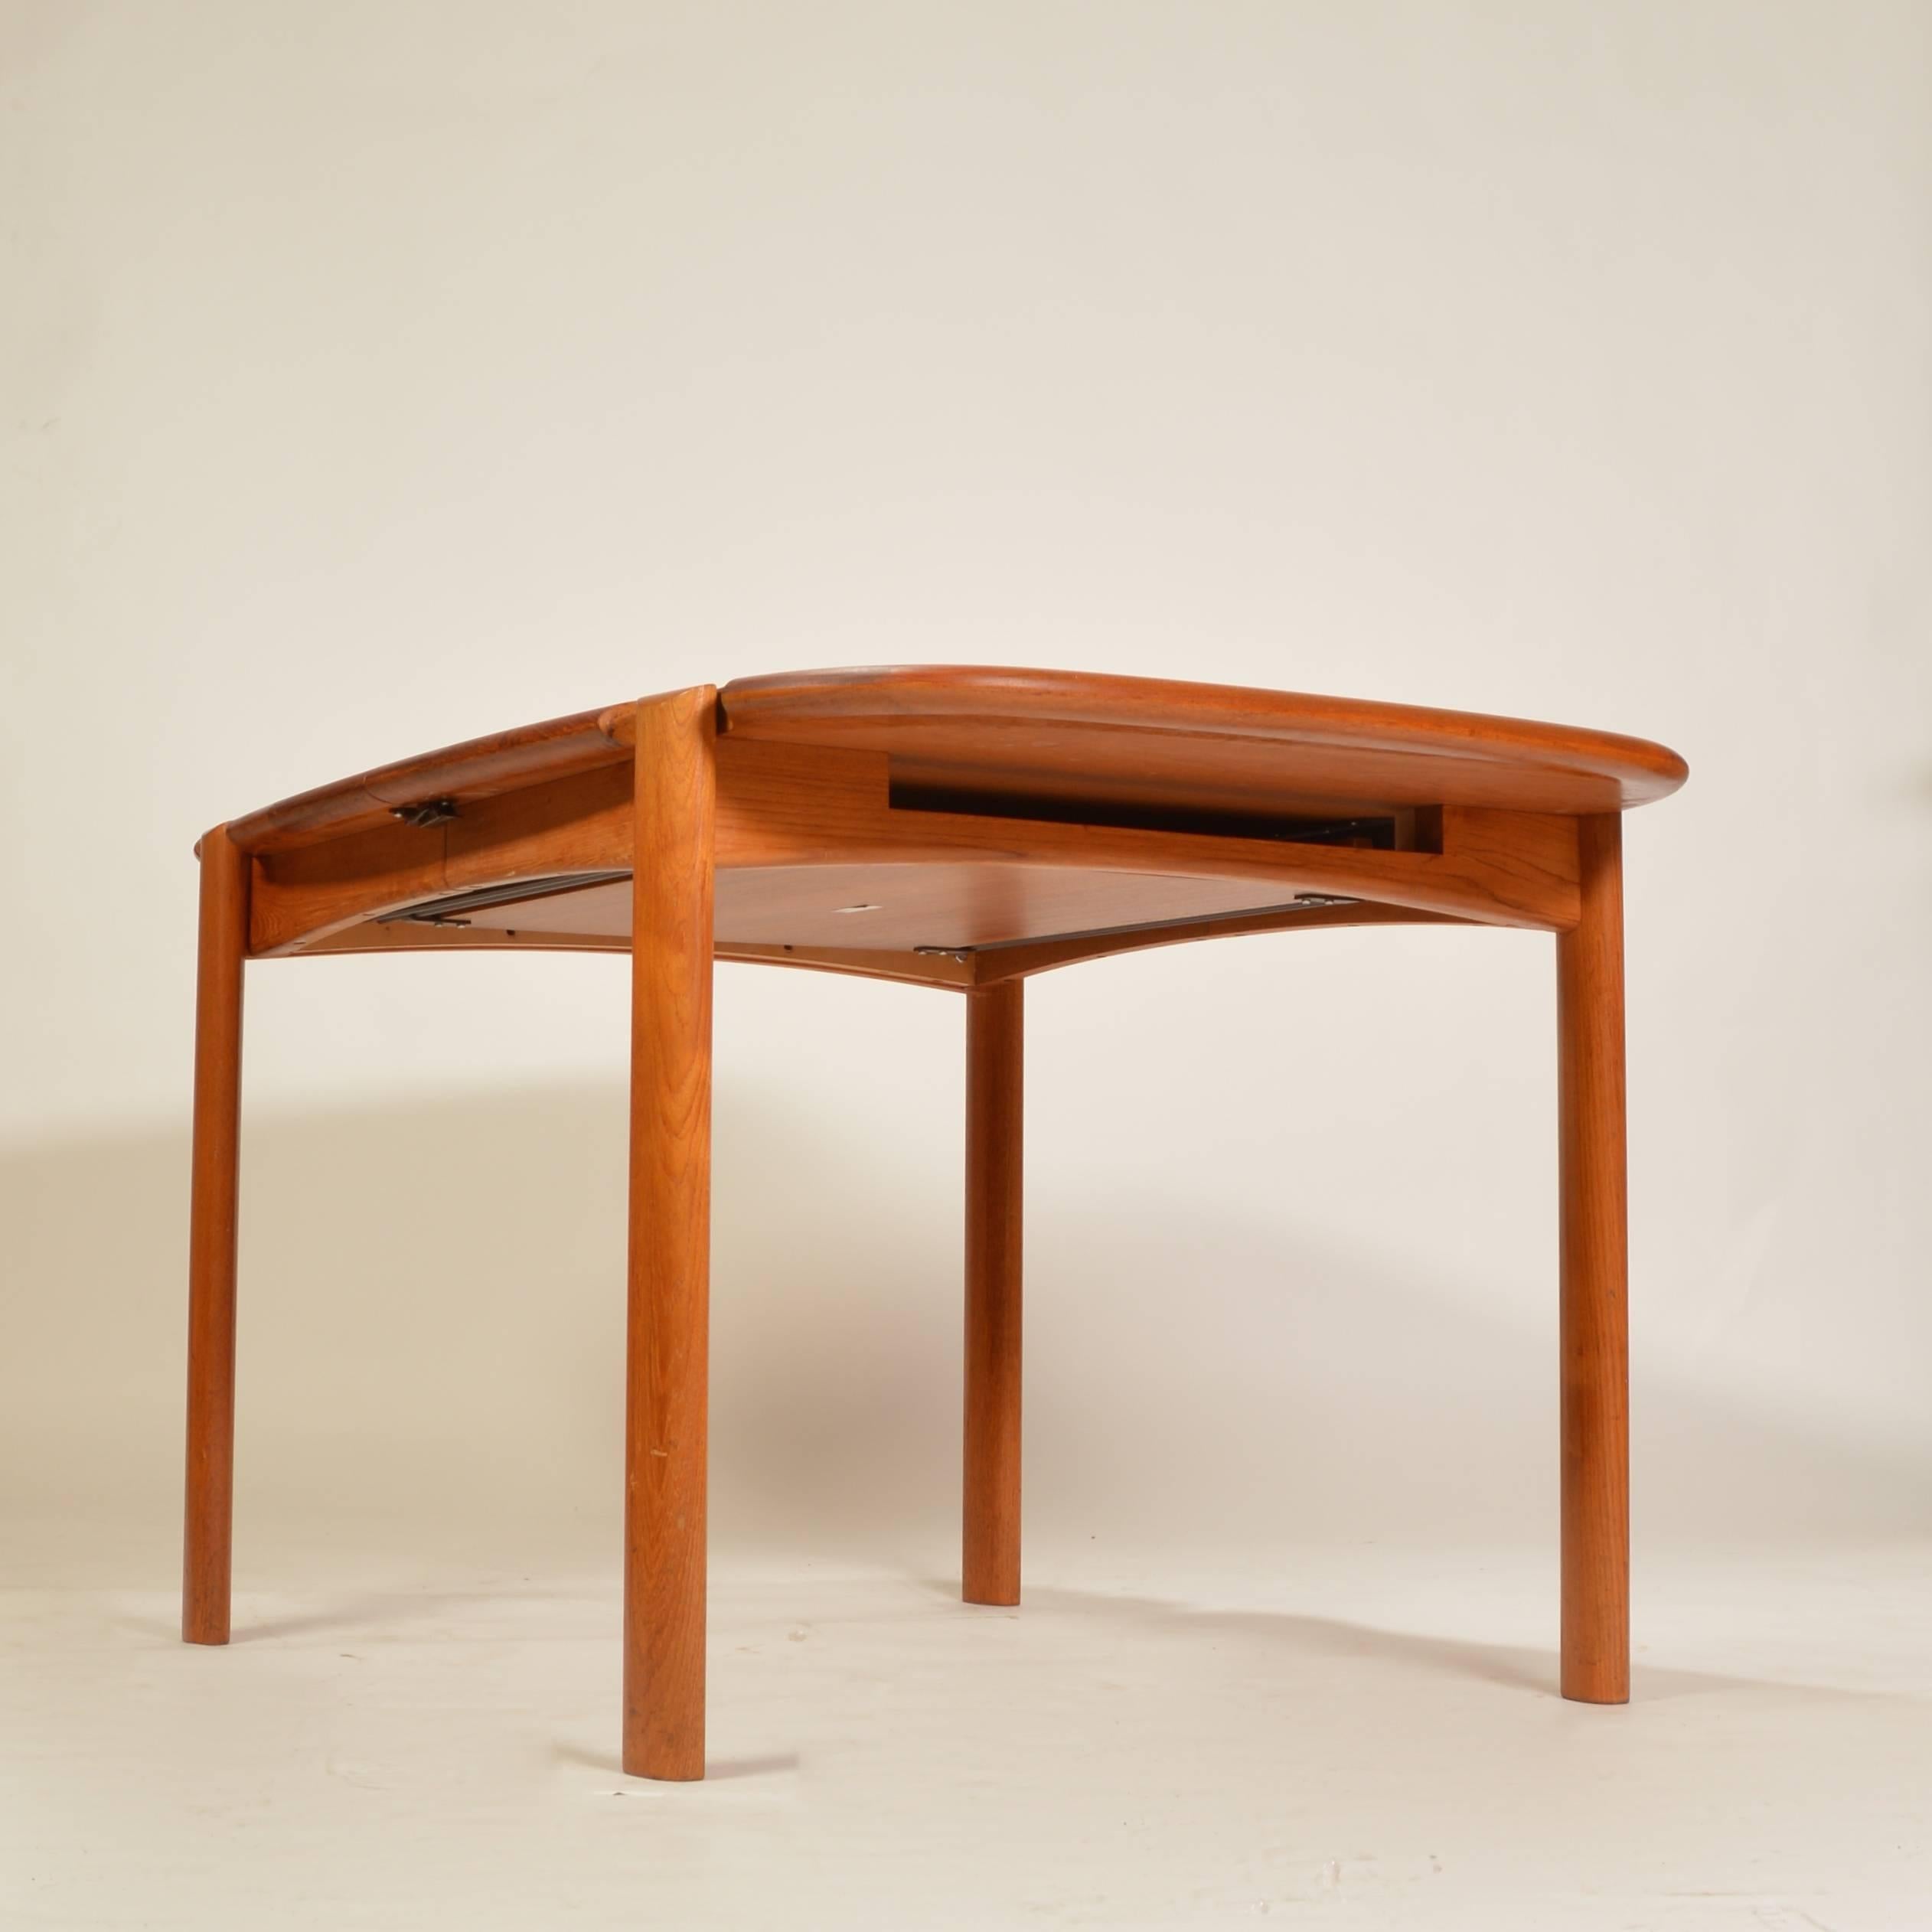 This is a very unique danish modern dining table made from 1